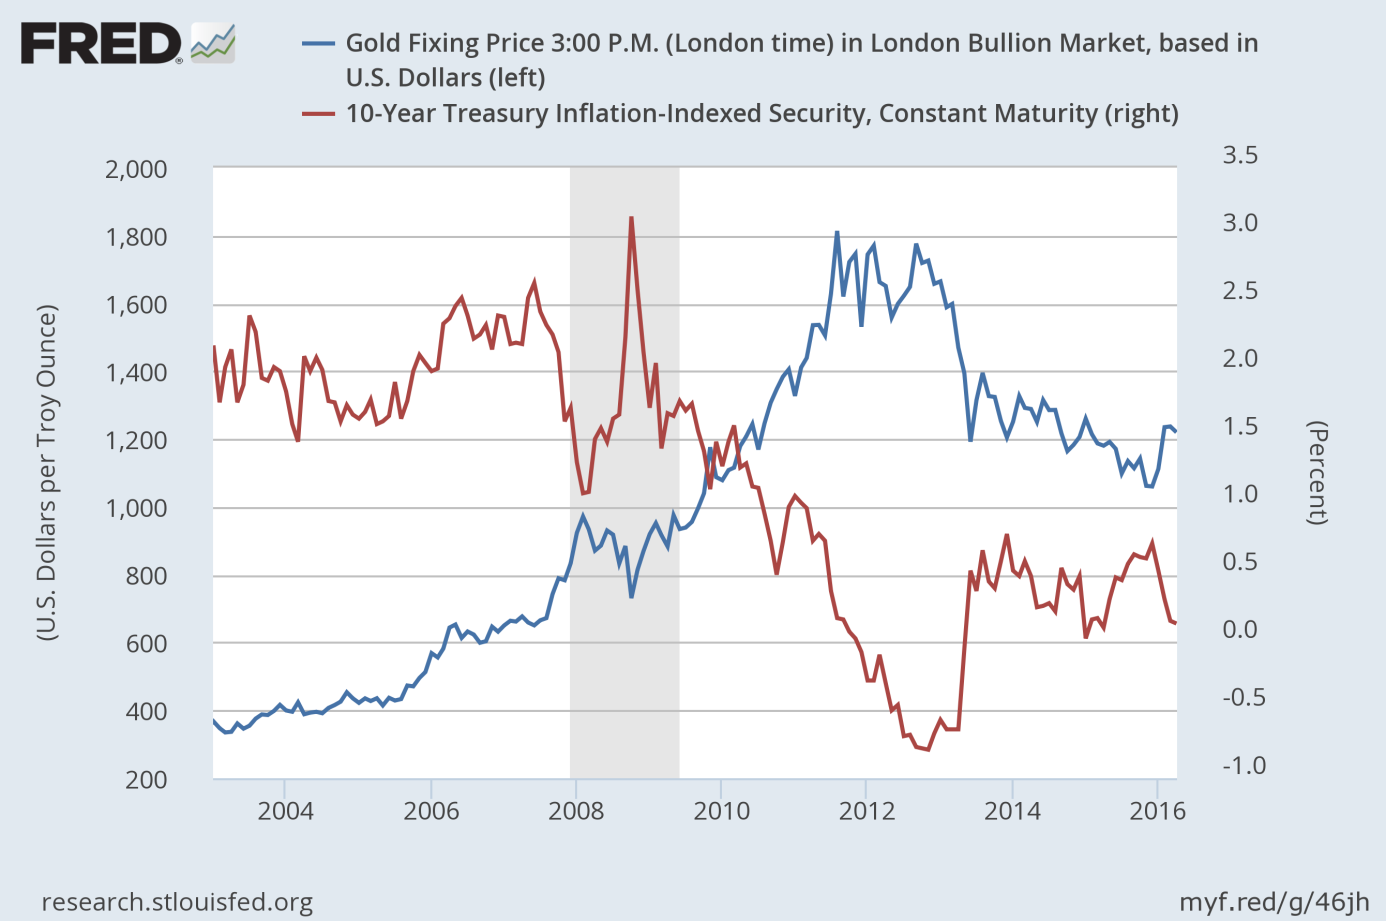 The price of gold and real interest rates